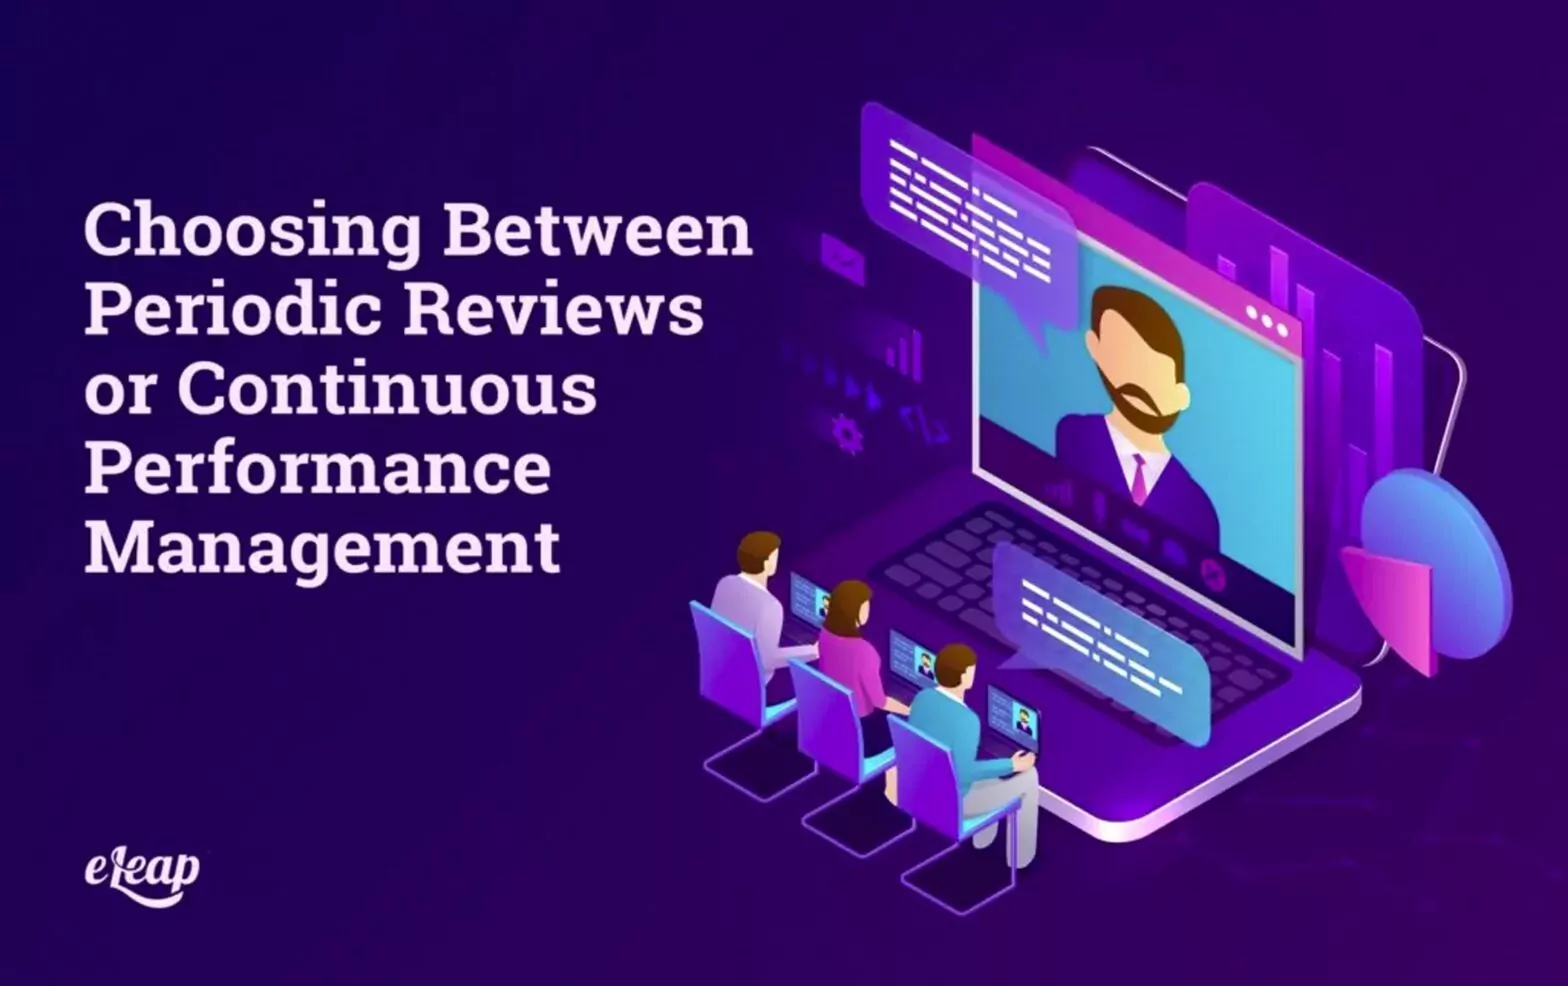 Choosing Between Periodic Reviews or Continuous Performance Management